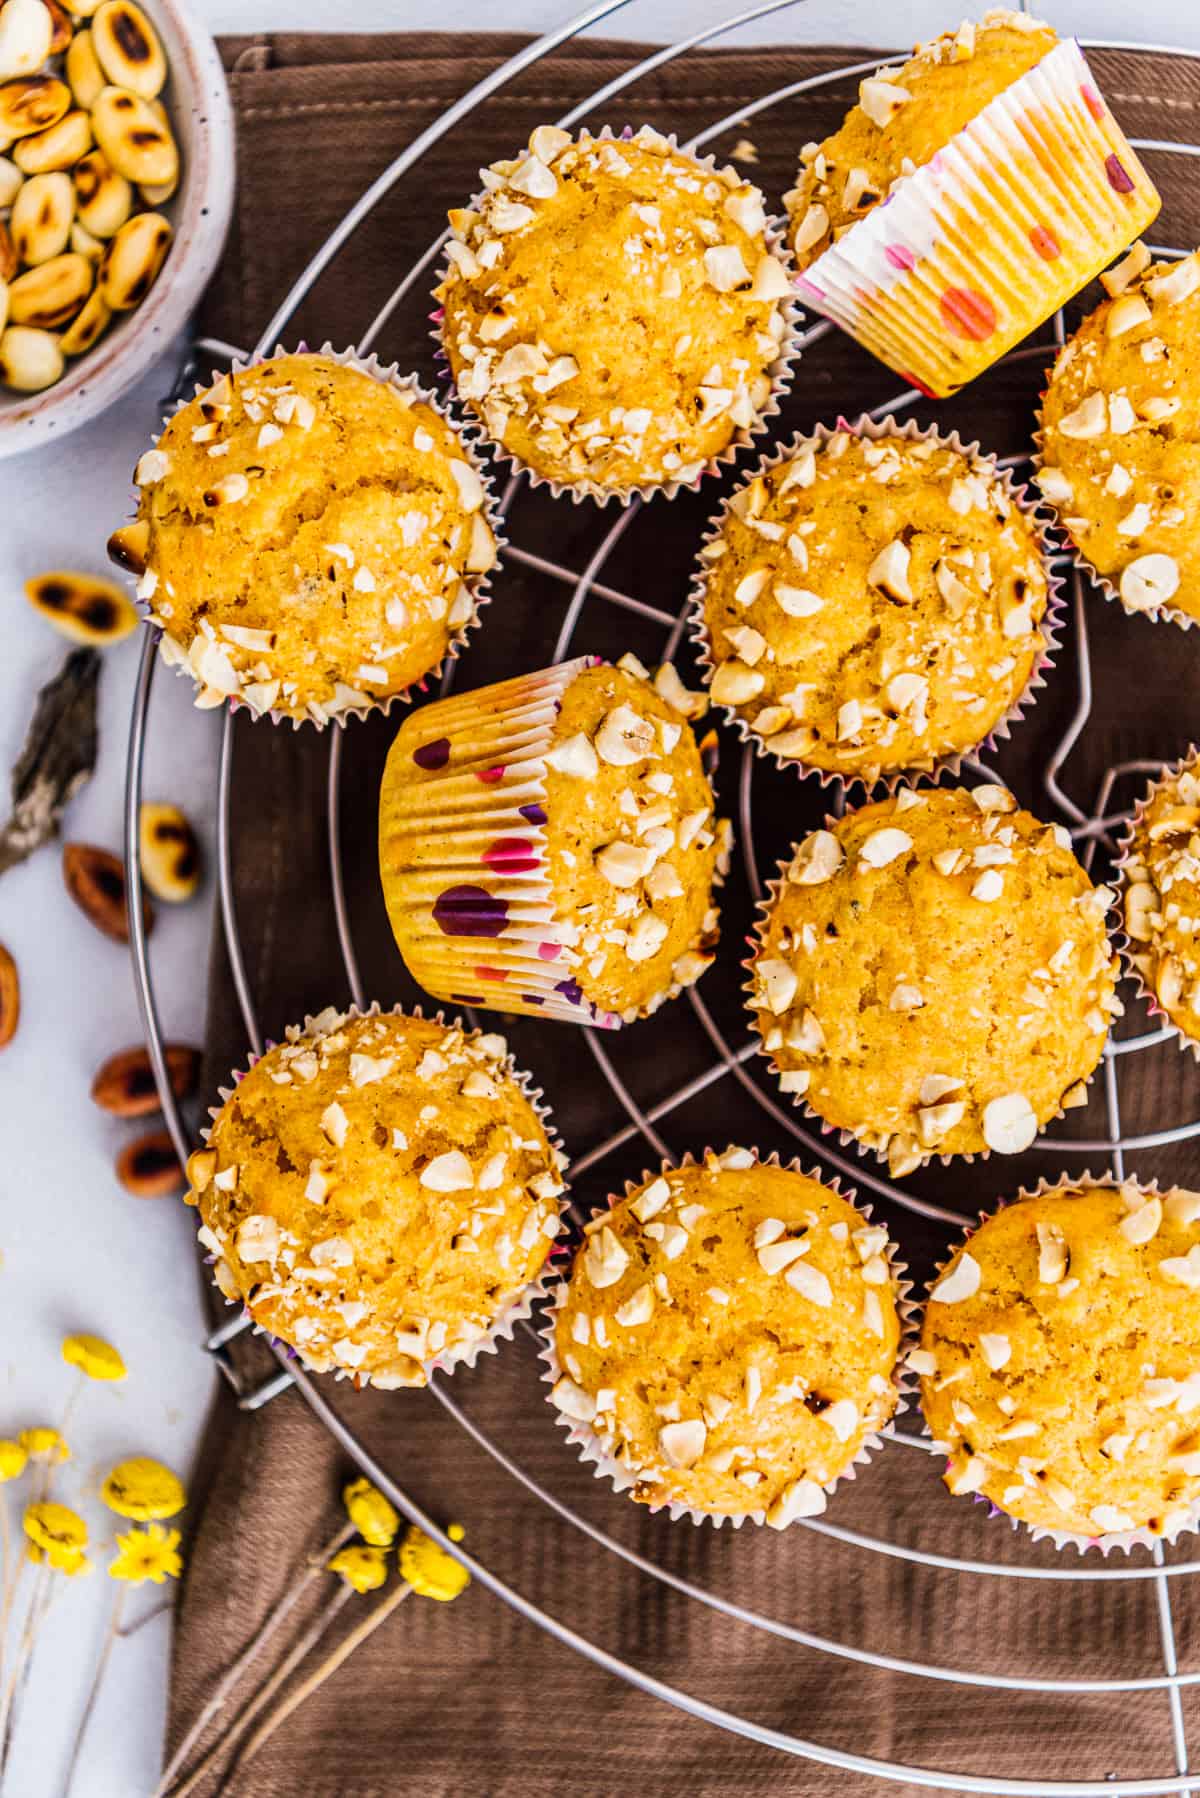 Pumpkin muffins with cake mix on a cooling rack and peanuts on the side.